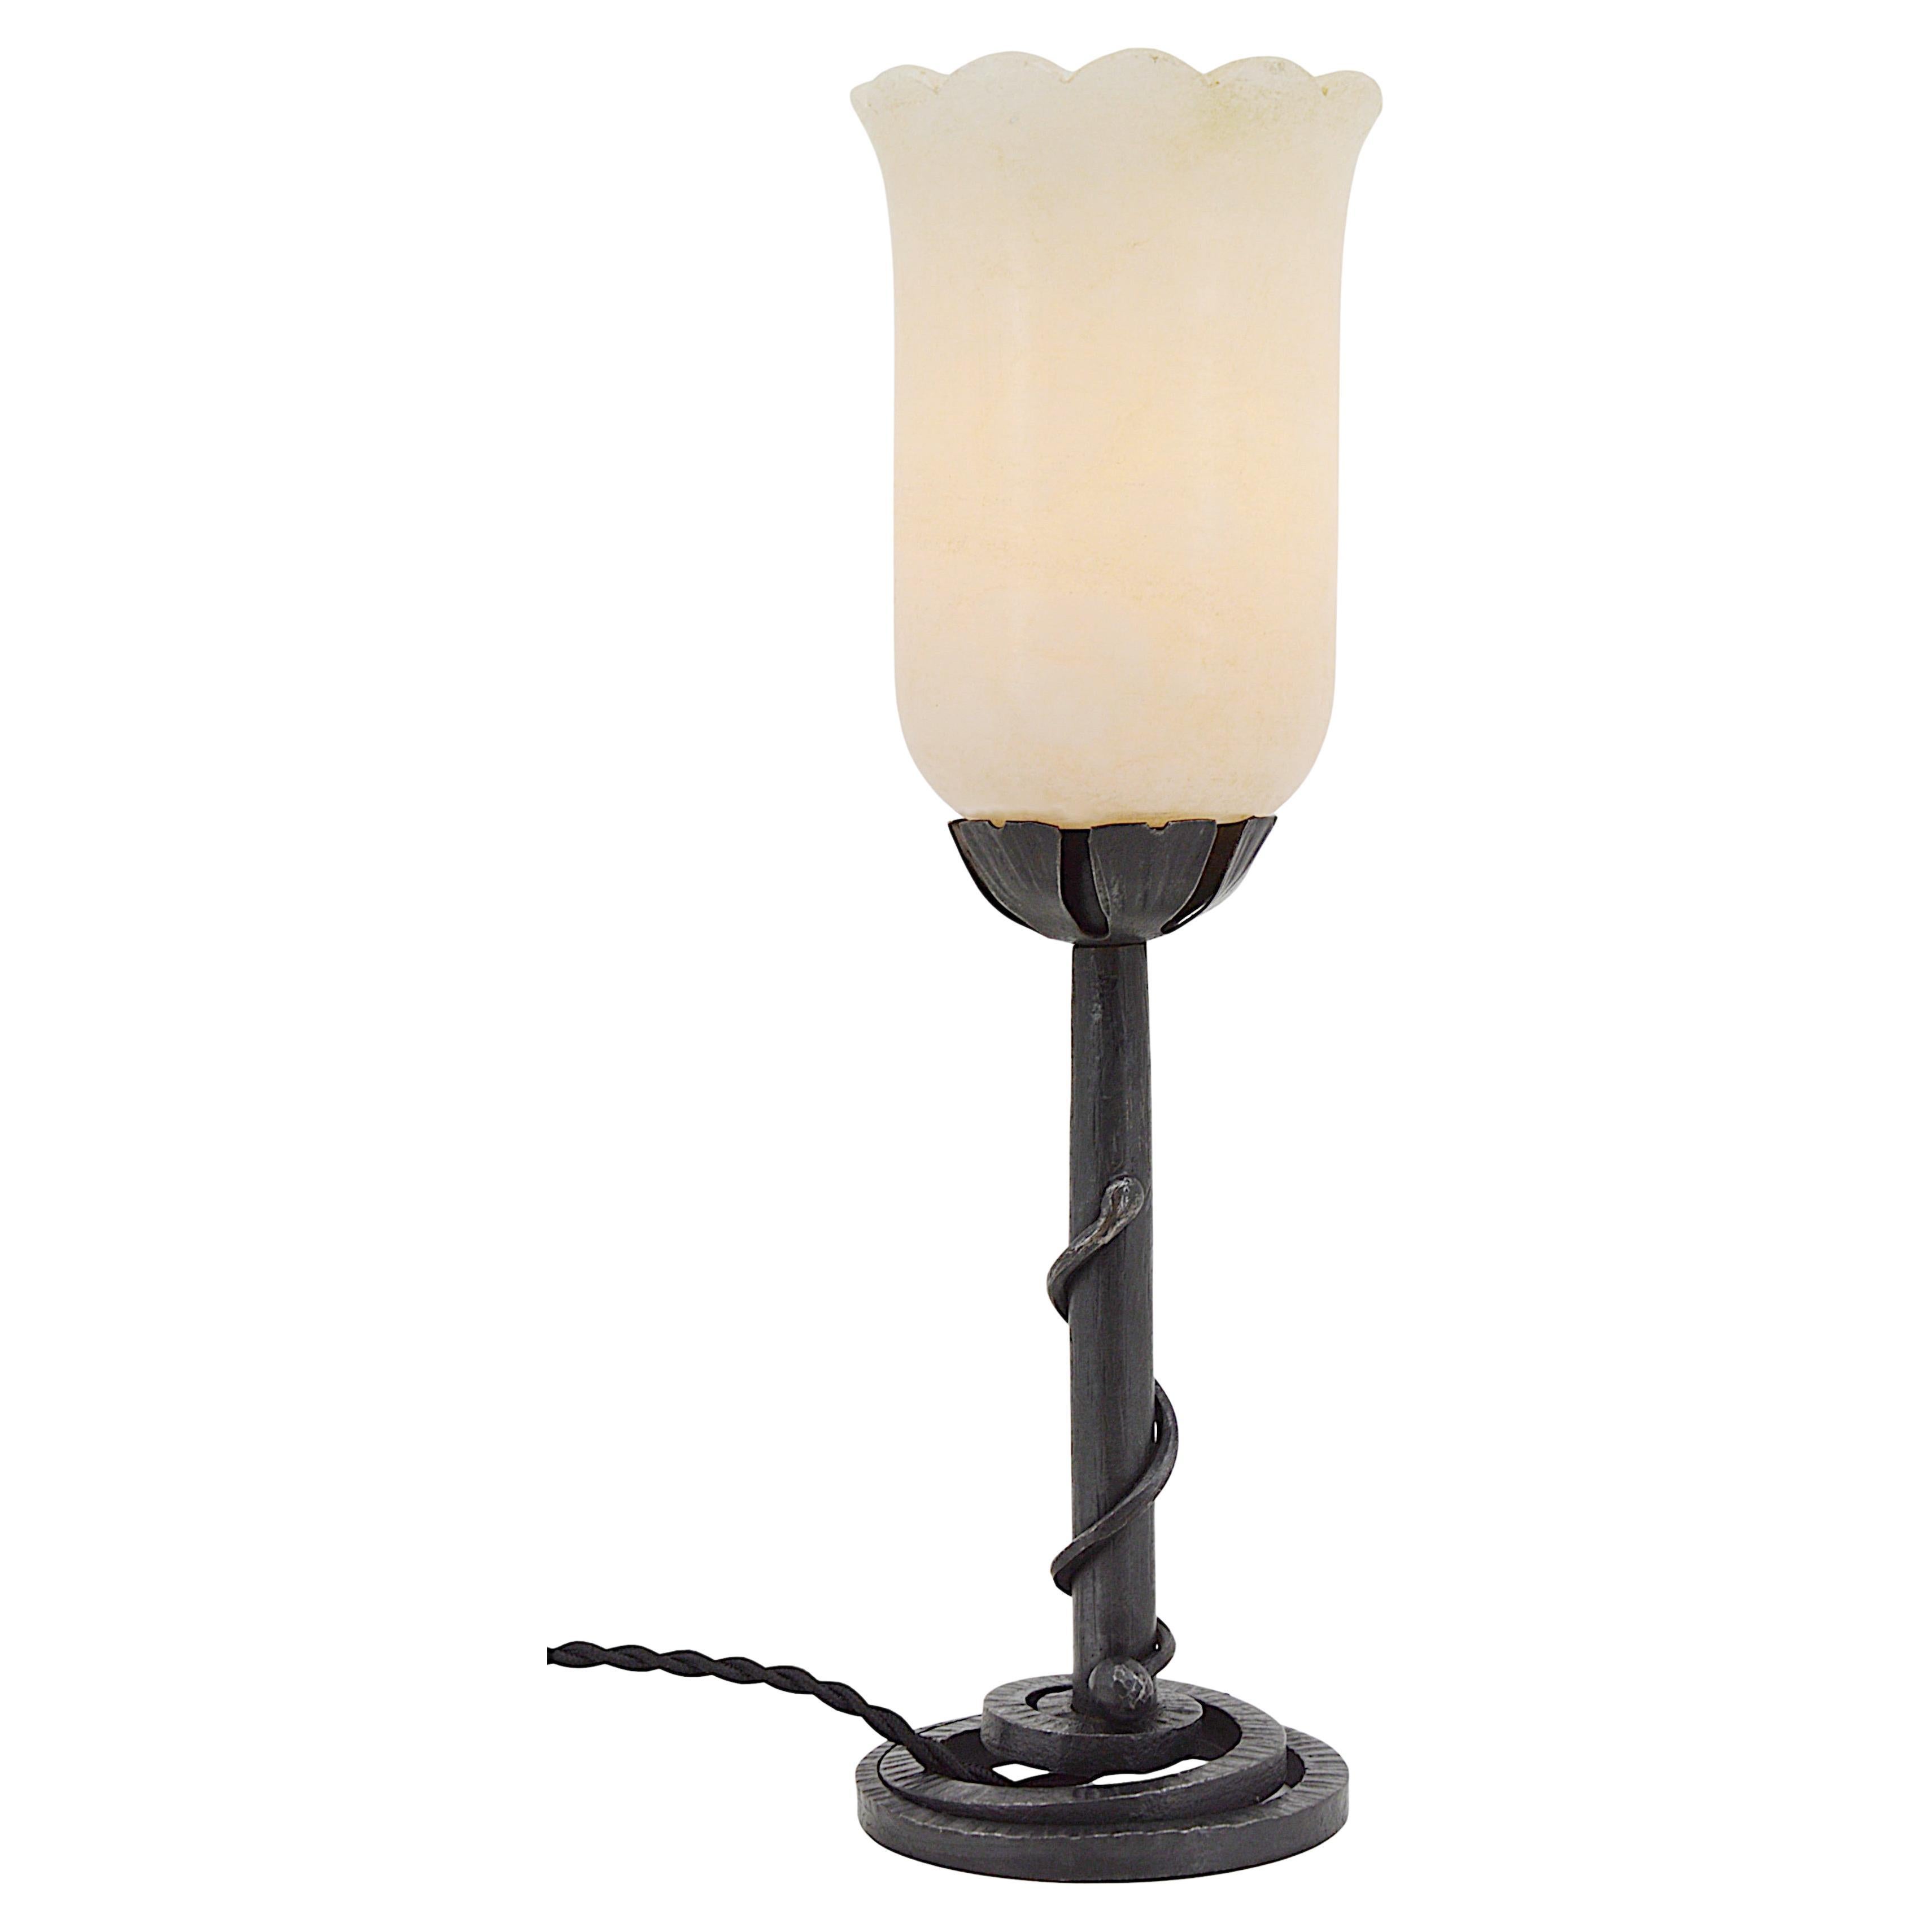 French Art Deco Alabaster & Snake Wrought-Iron Table Lamp, 1920s For Sale